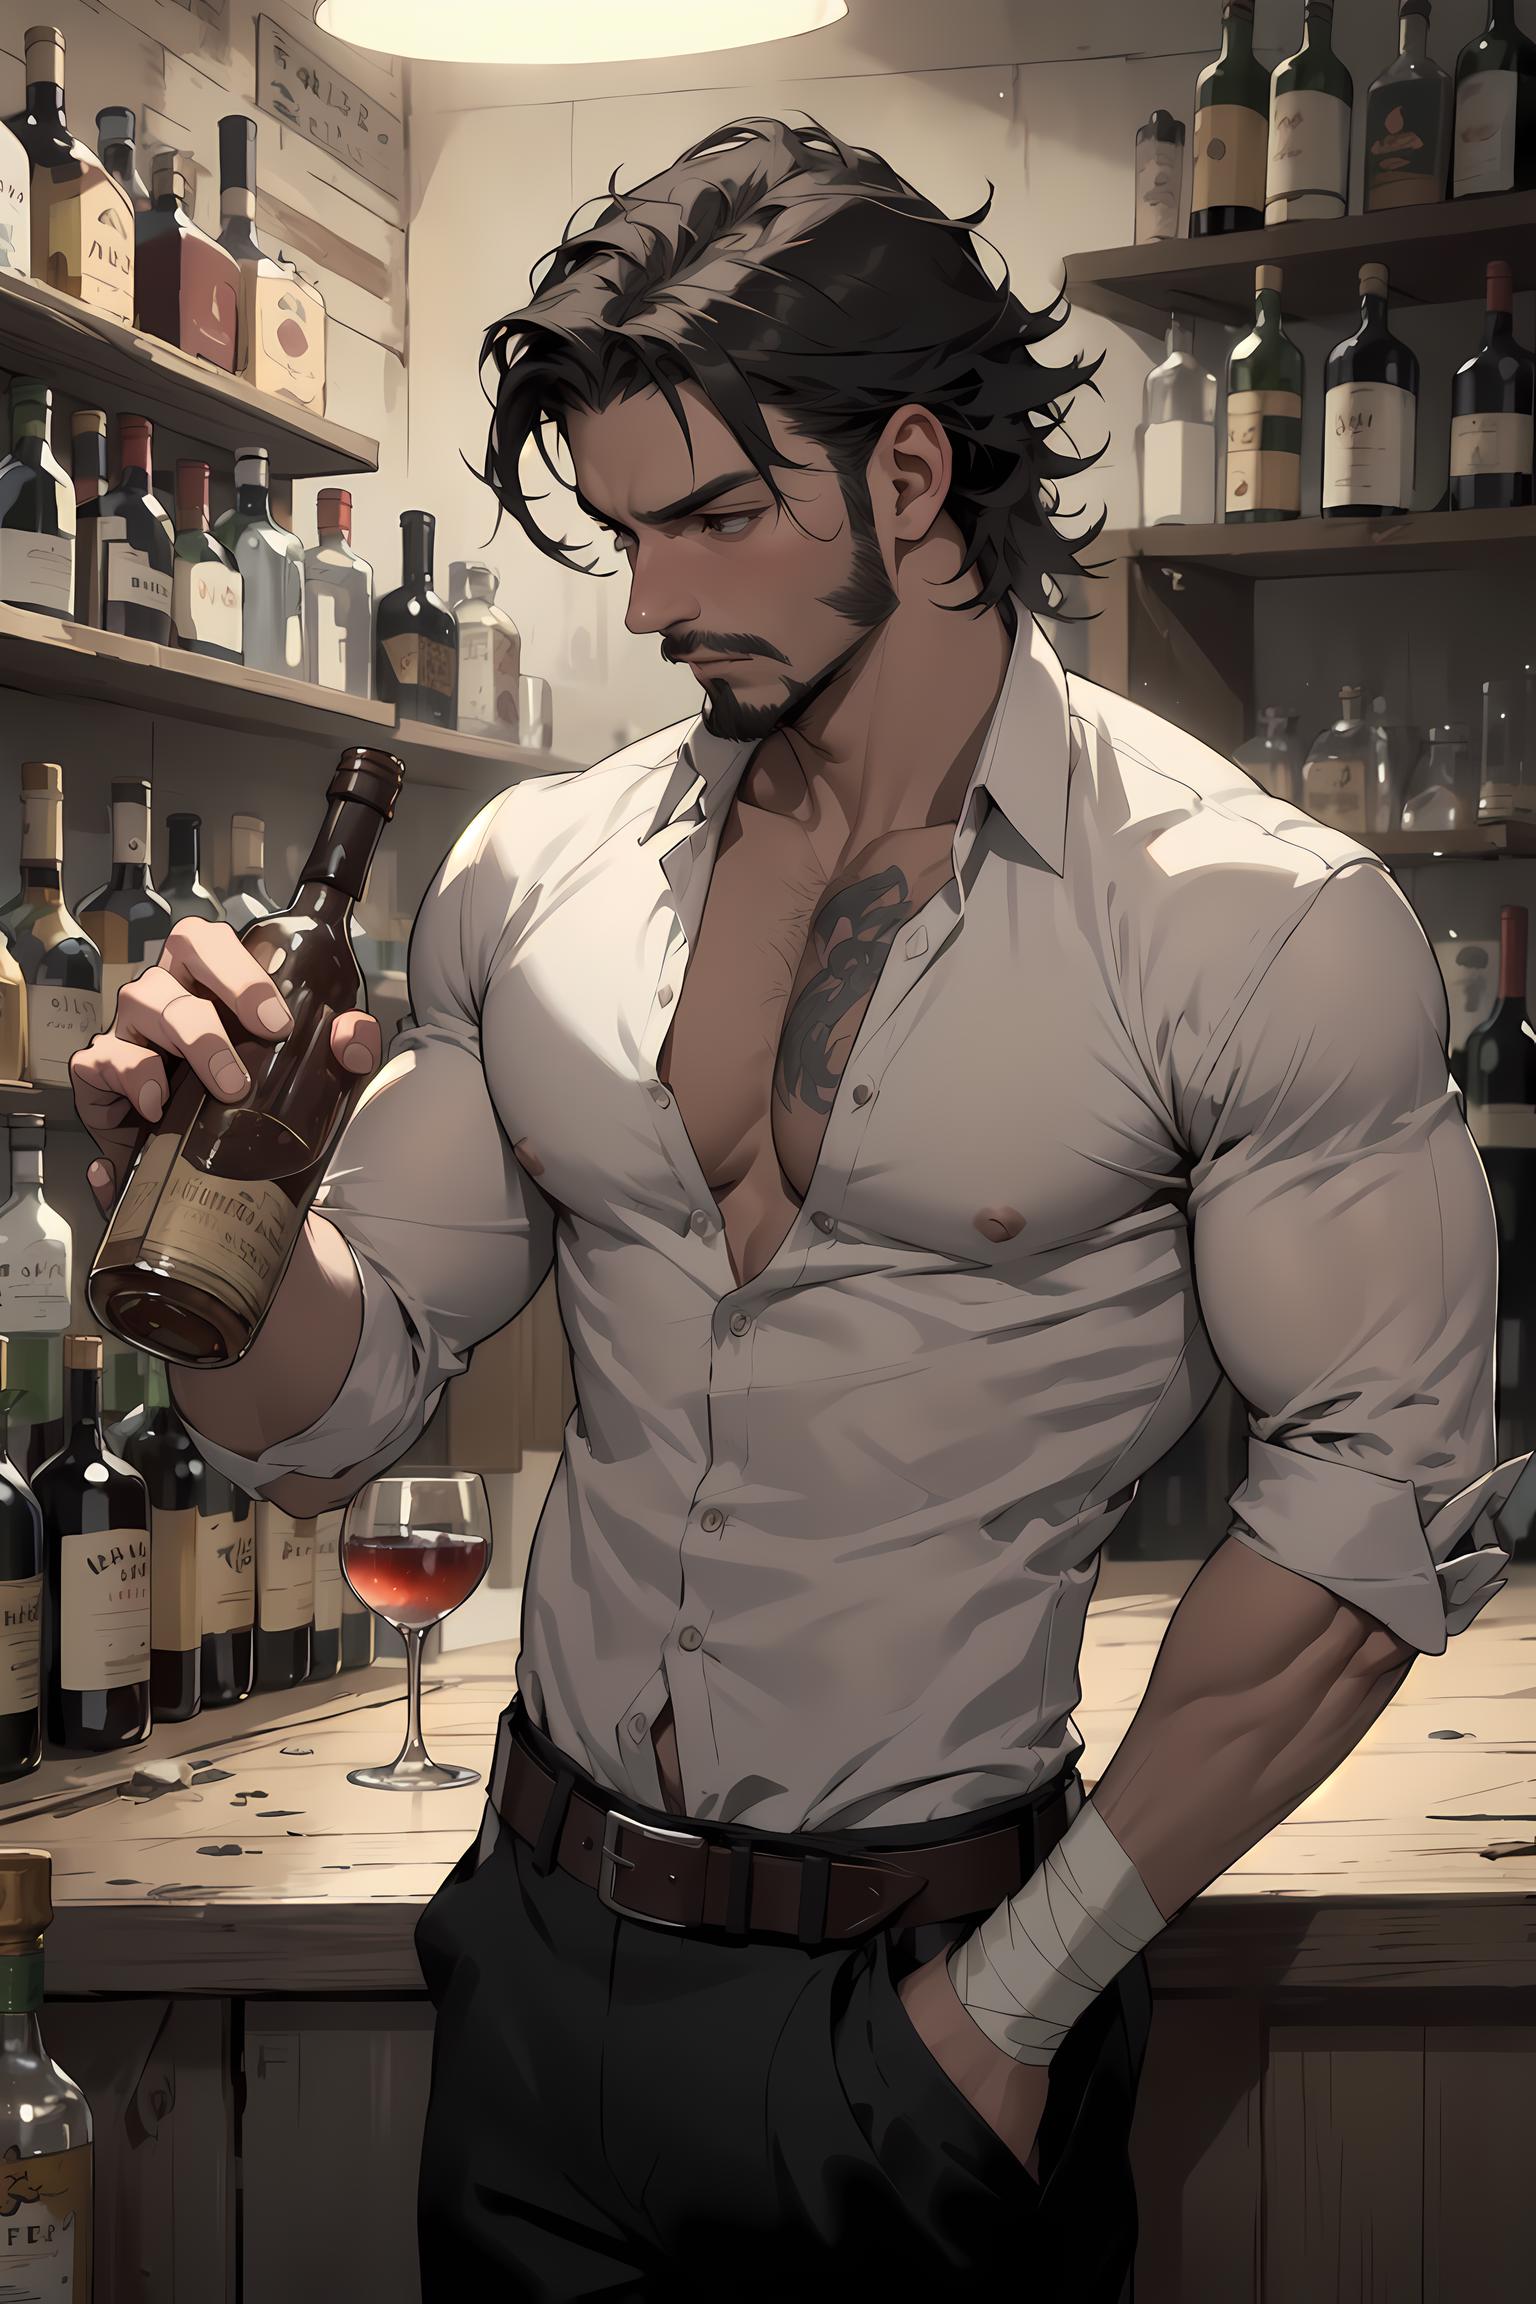 Drawing of a man holding a bottle of wine in front of a shelf full of wine bottles.